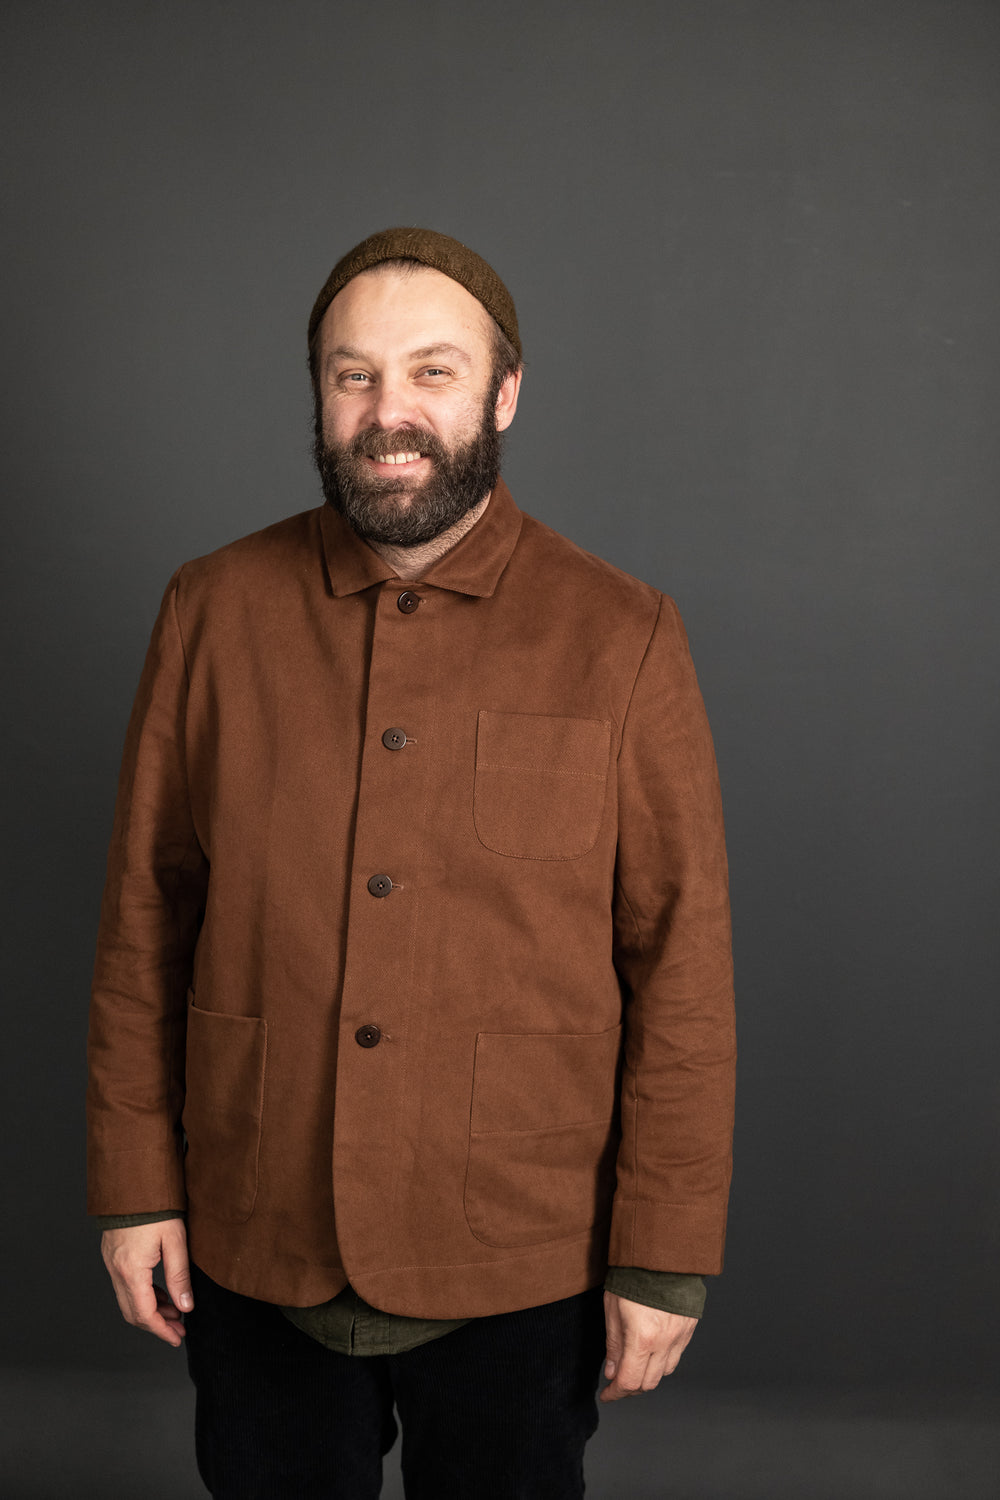 Man wearing the Men's Foreman Jacket sewing pattern from Merchant and Mills on The Fold Line. A jacket pattern made in oilskin, cotton canvas, twill, denim, linen corduroy or woollen tweed fabrics, featuring a boxy cut, two piece sleeves, square collar, b